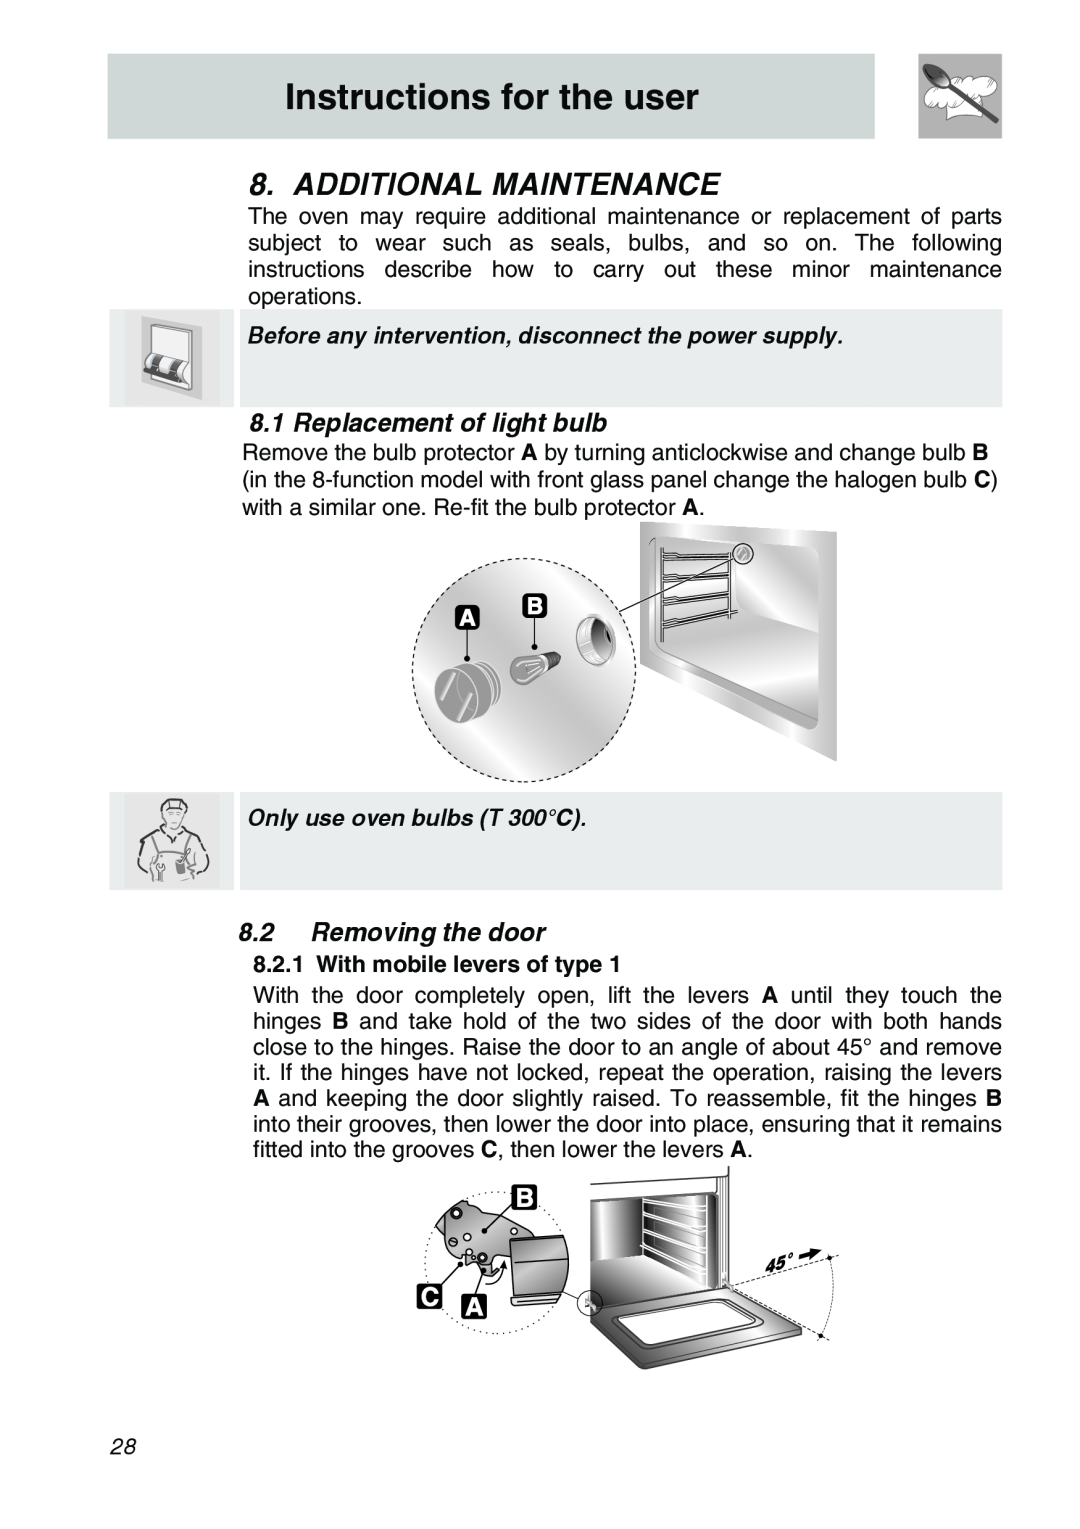 Smeg SCA301X, SCA306X Additional Maintenance, Replacement of light bulb, 8.2Removing the door, Instructions for the user 